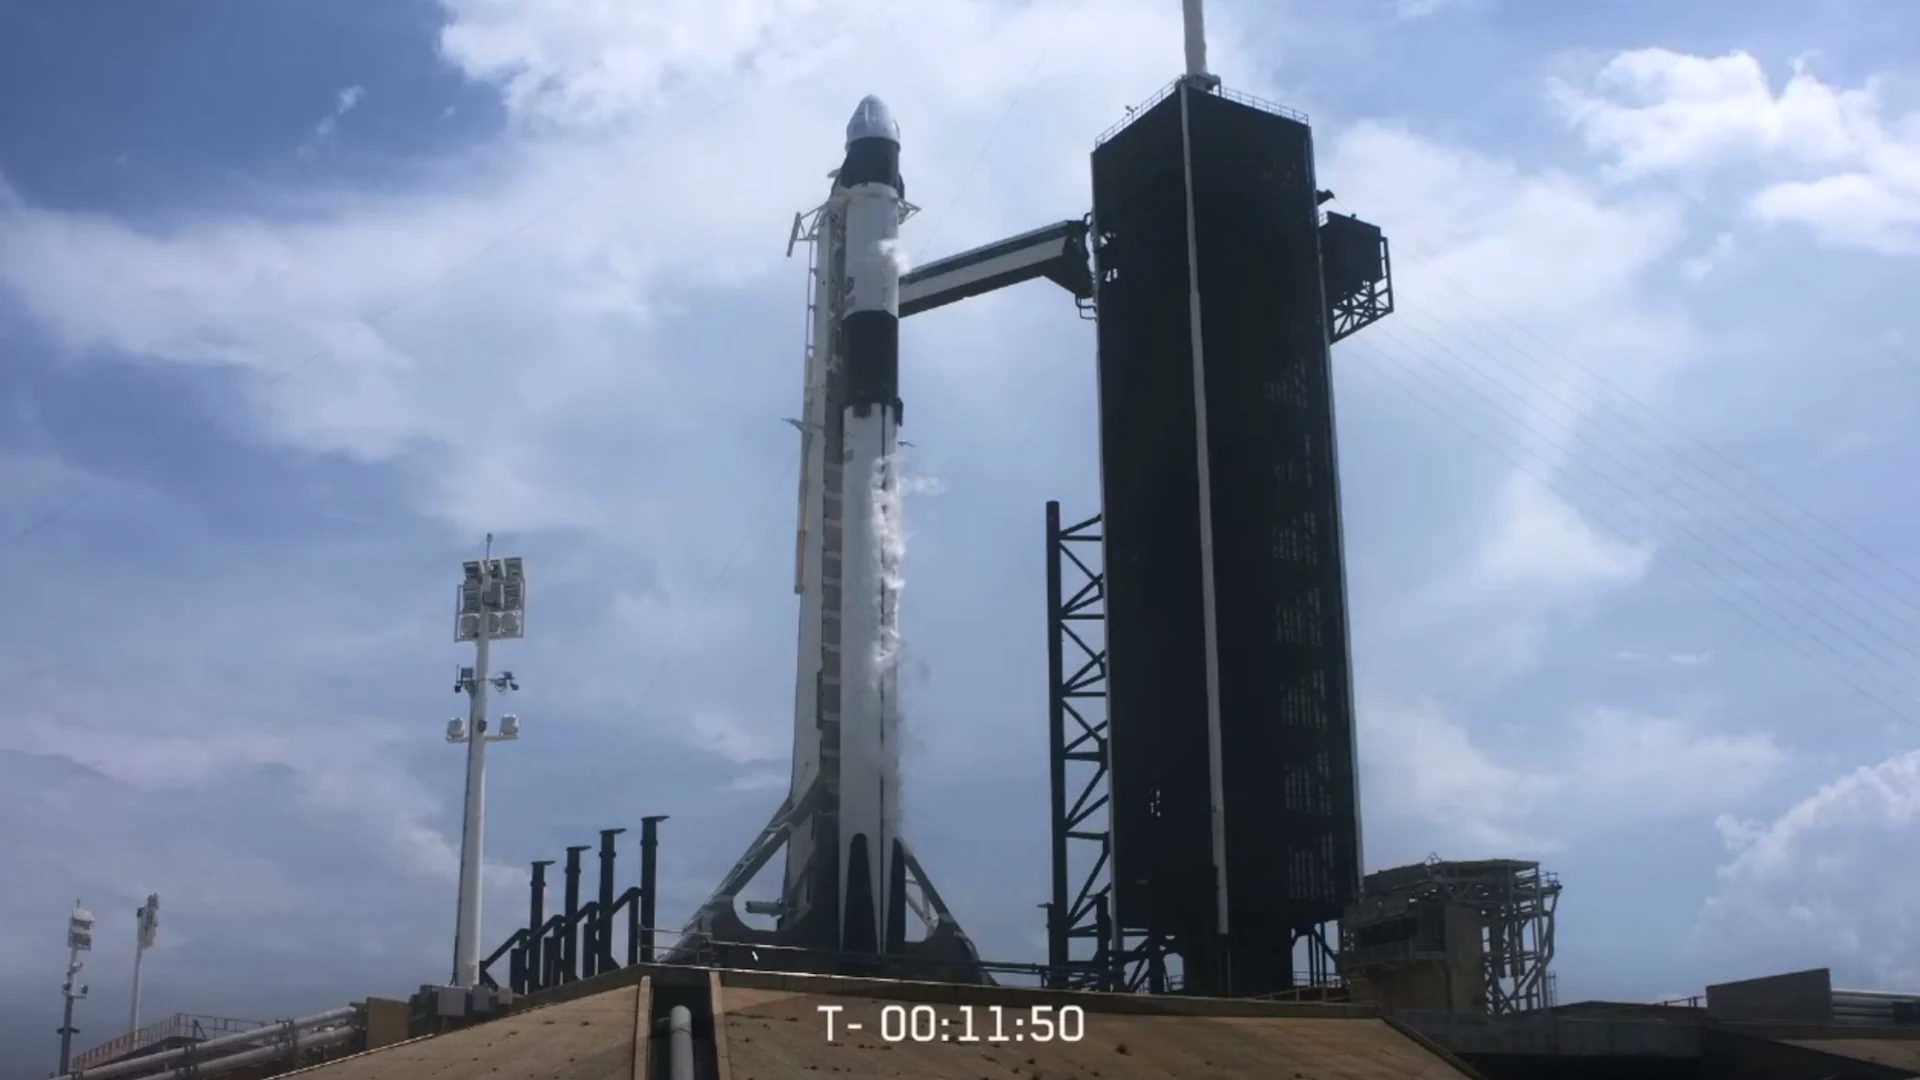 A SpaceX rocket fell into the ocean after a record 19th space mission